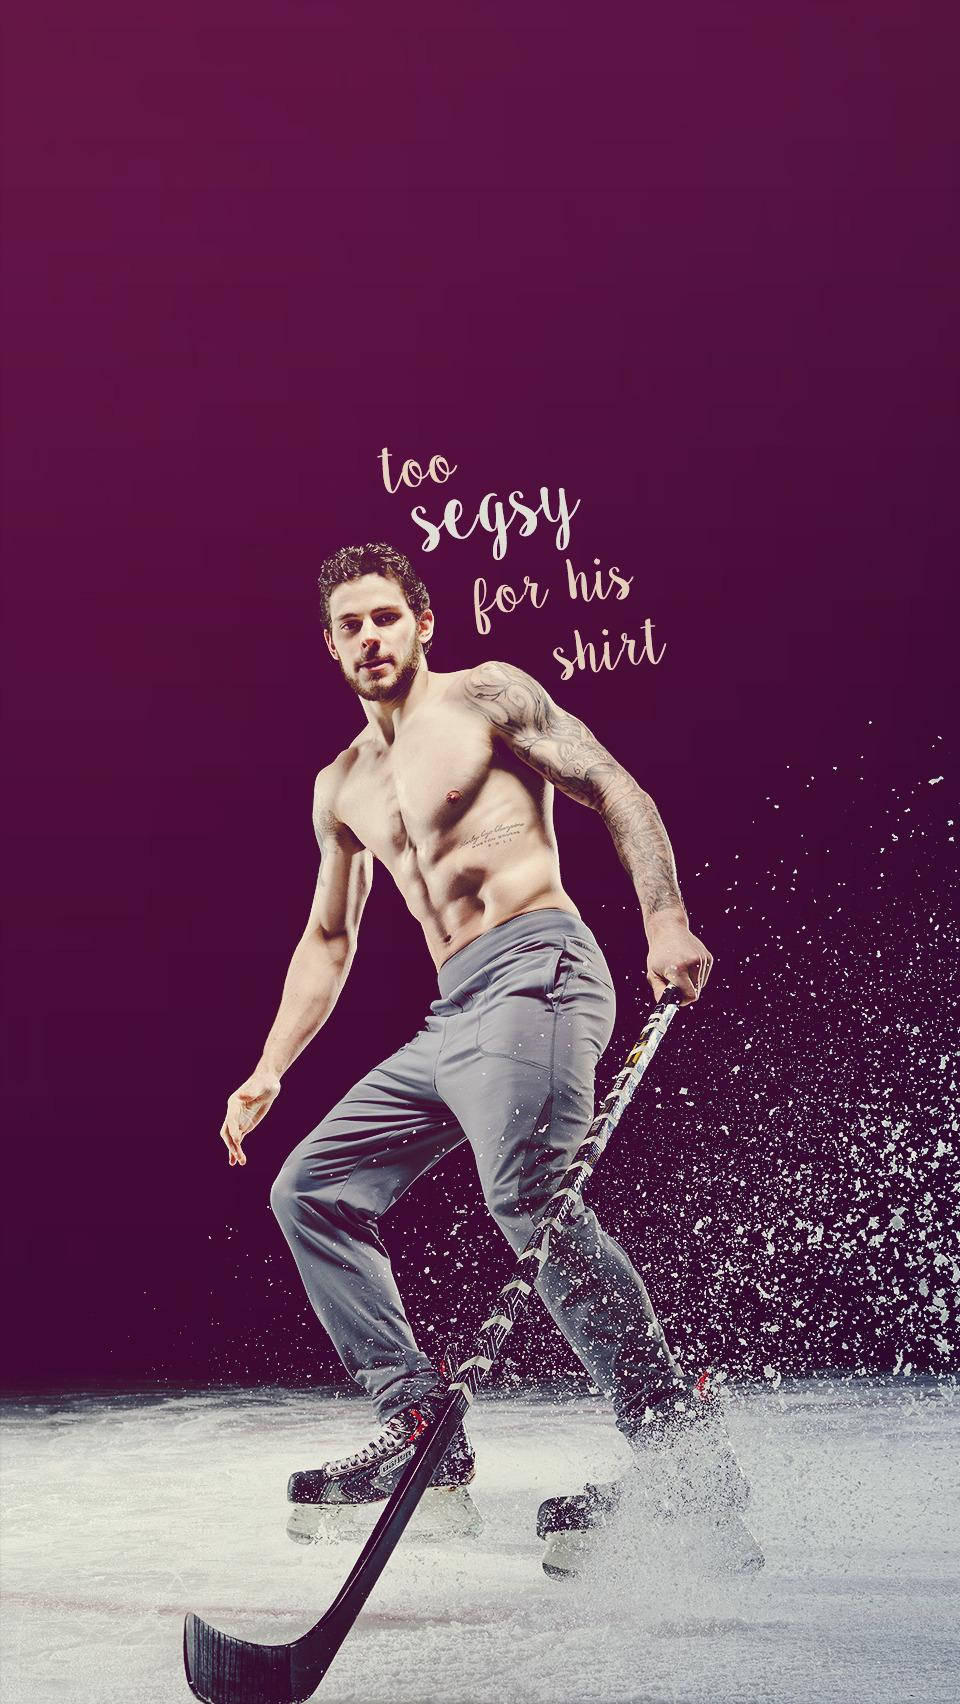 NHL Star Tyler Seguin Expressing Power and Determination on the Ice. Wallpaper